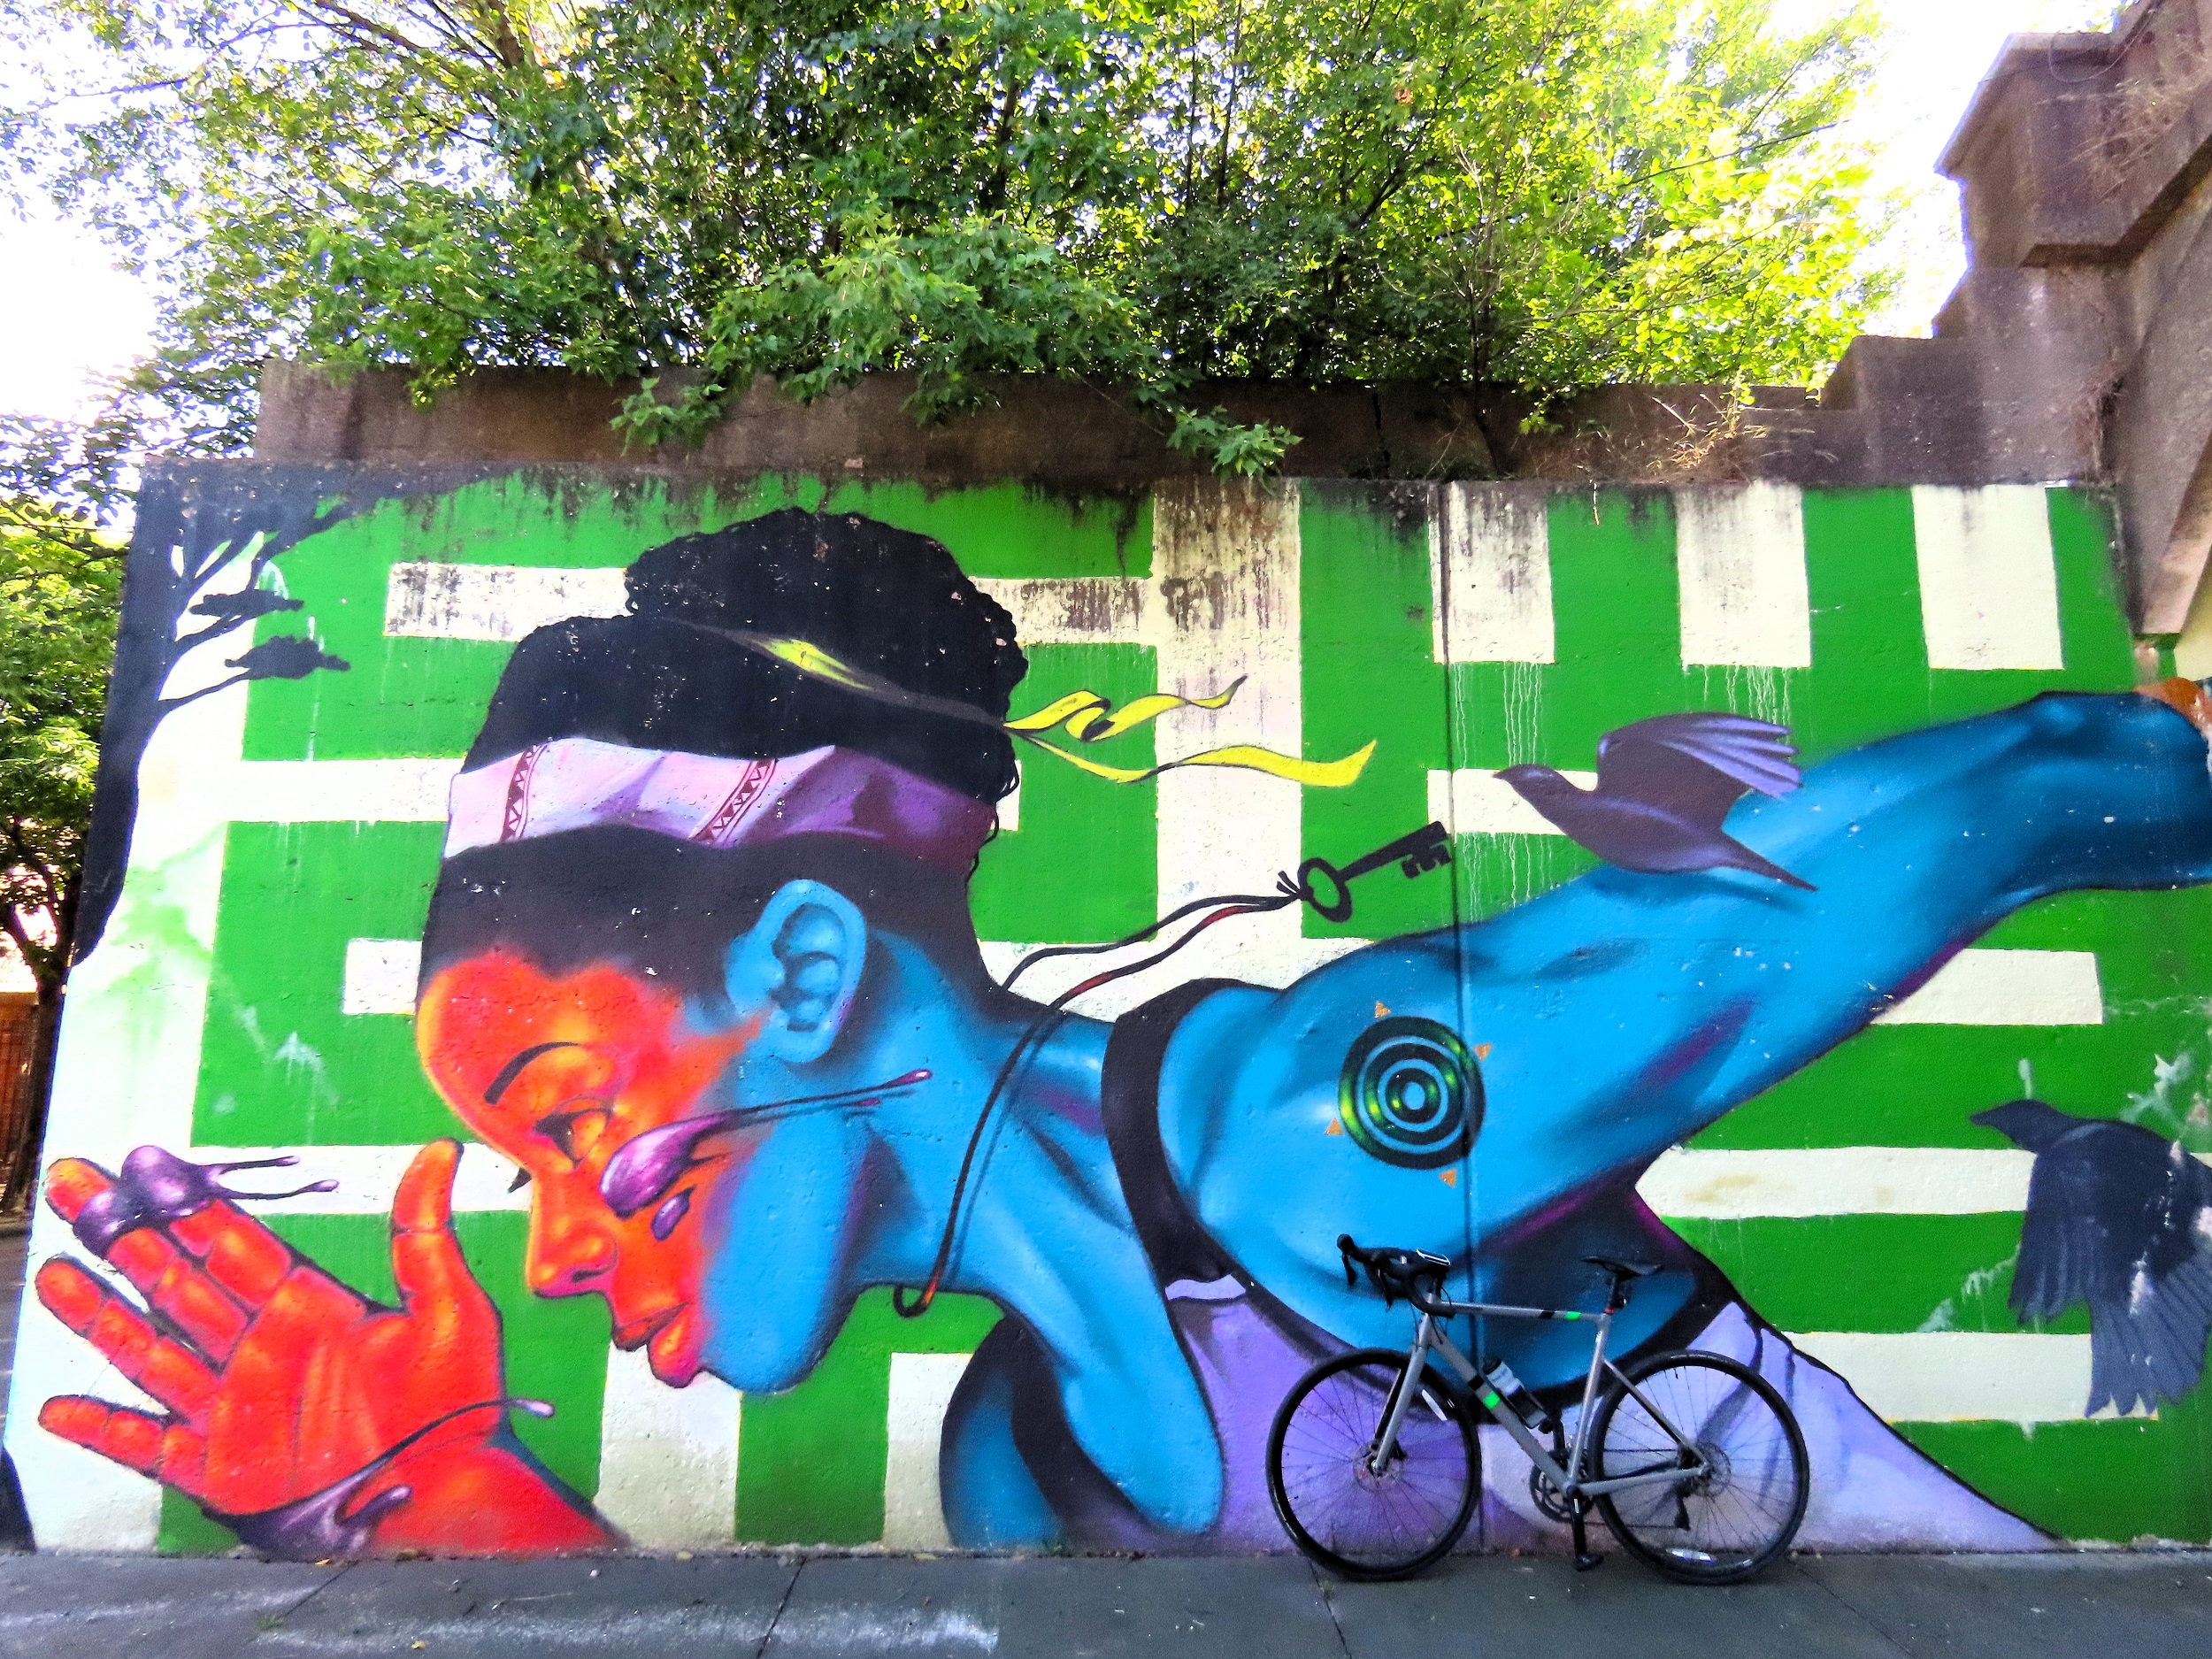 A tour bike leaning on a bright colored mural of the upper half of a Black woman sprinting.